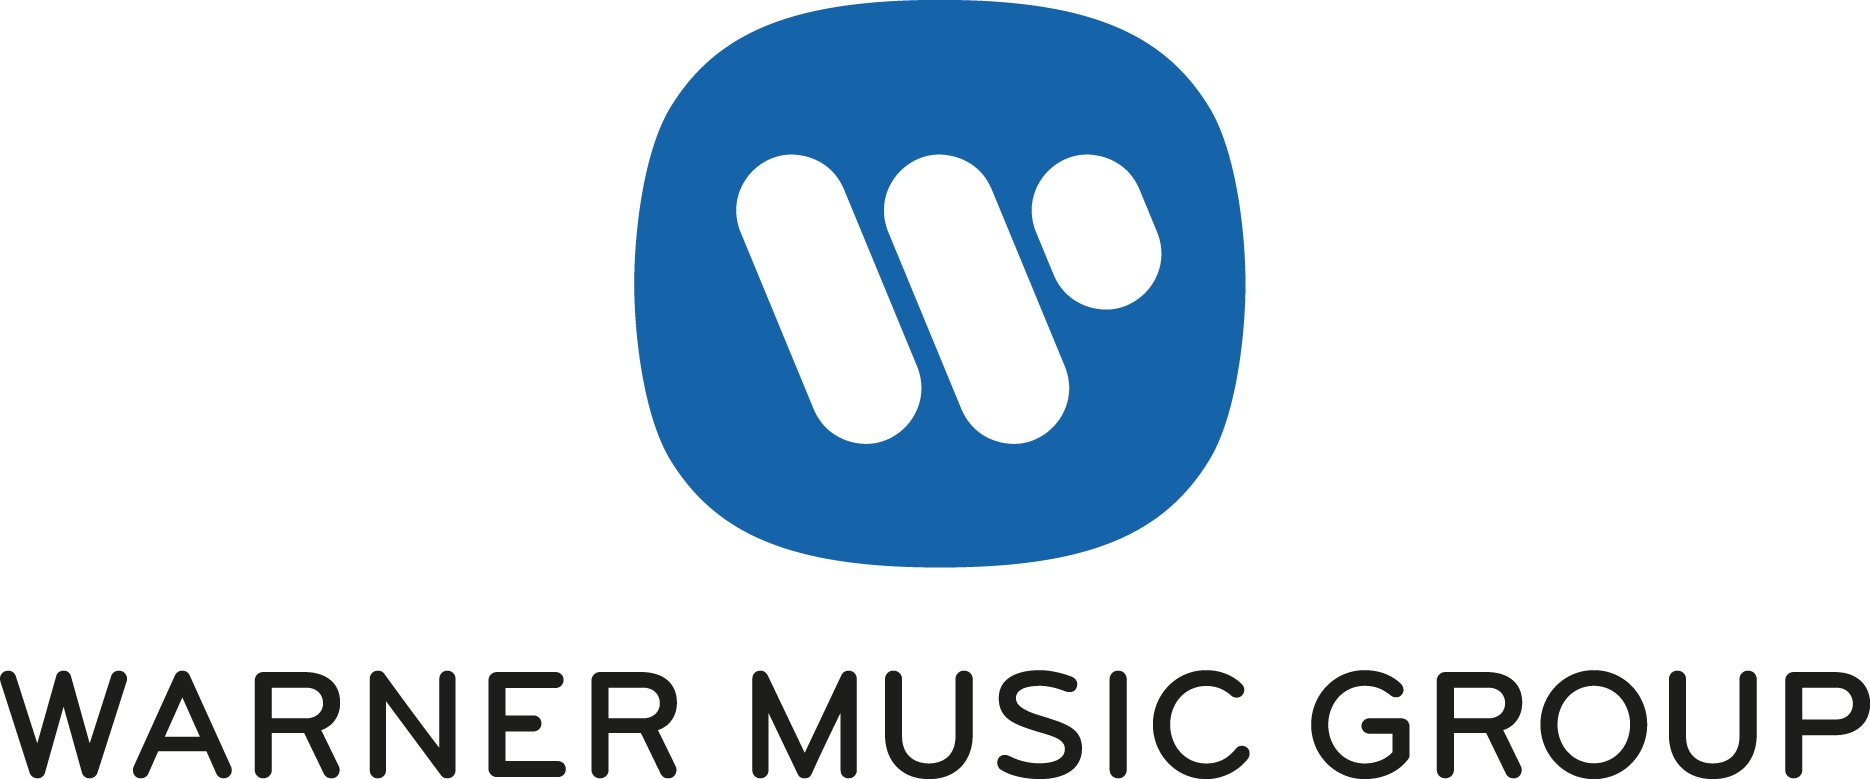 Warner Music Say They’ll Share Digital Equity With Artists